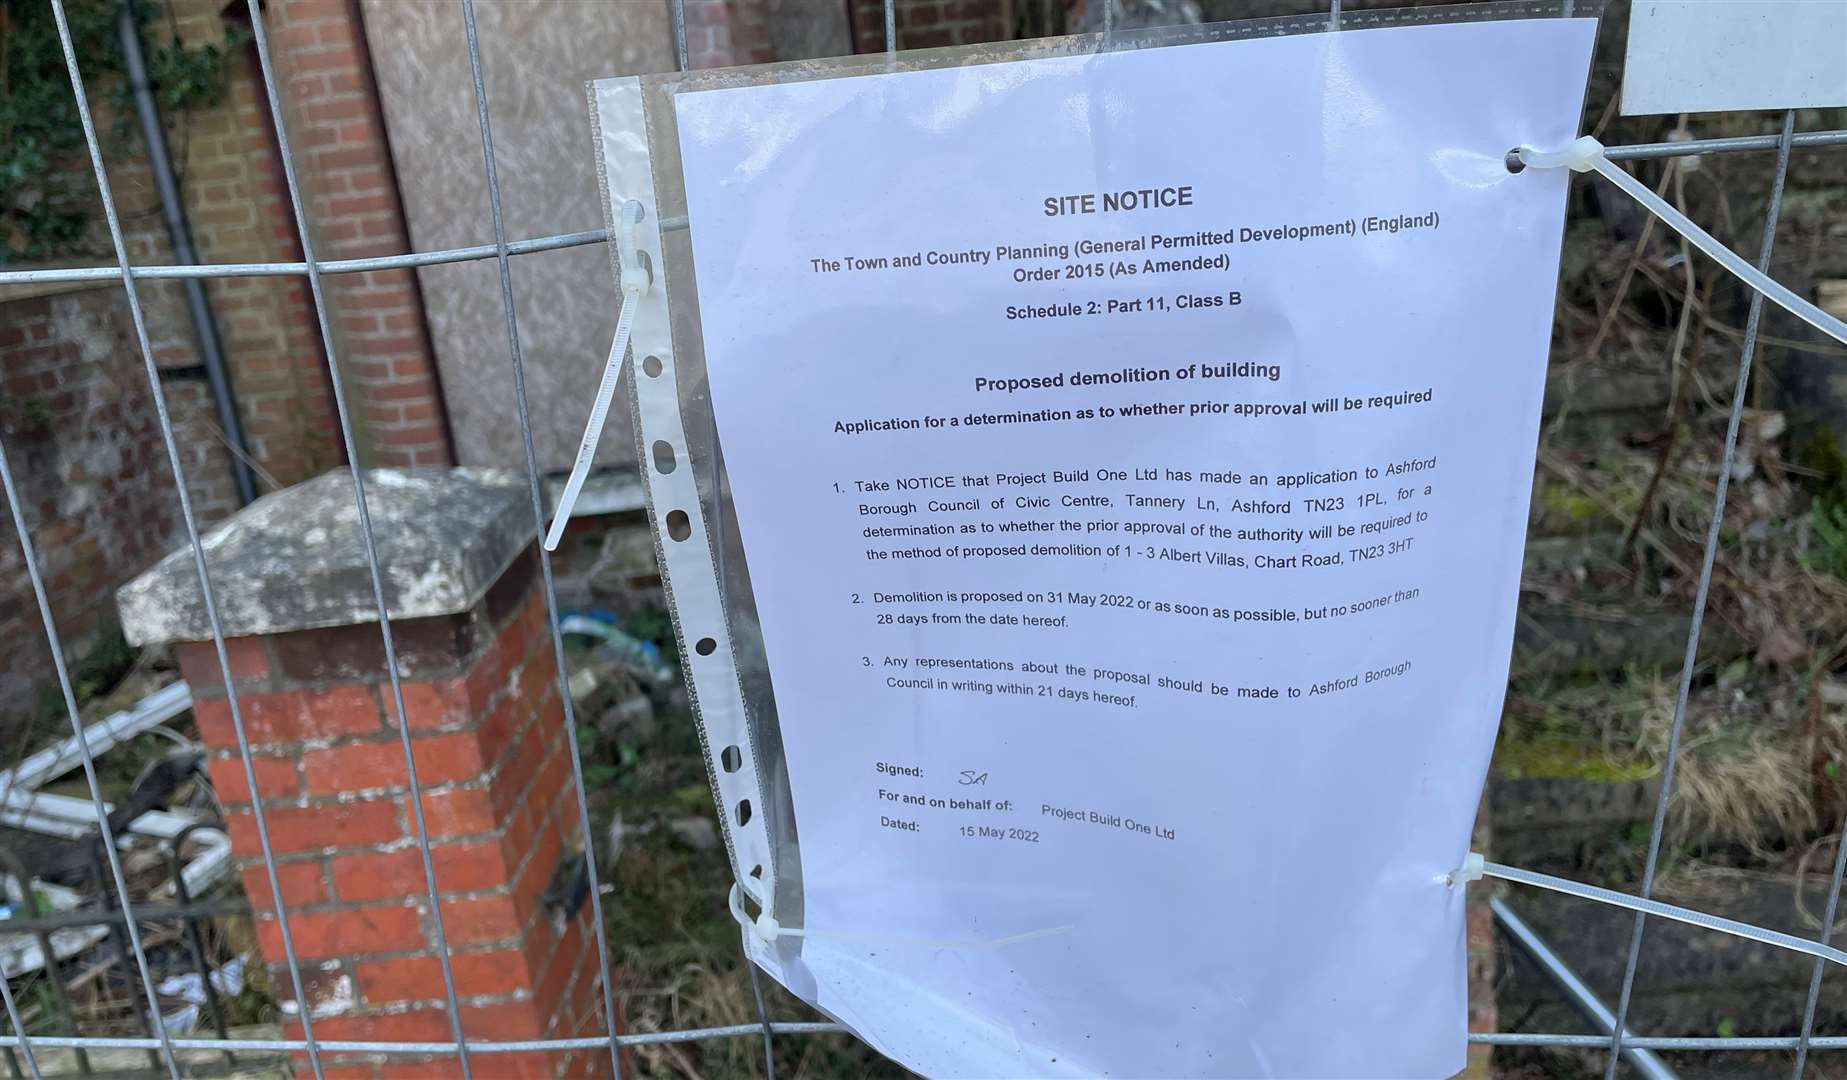 A demolition notice was attached to the building in March 2022